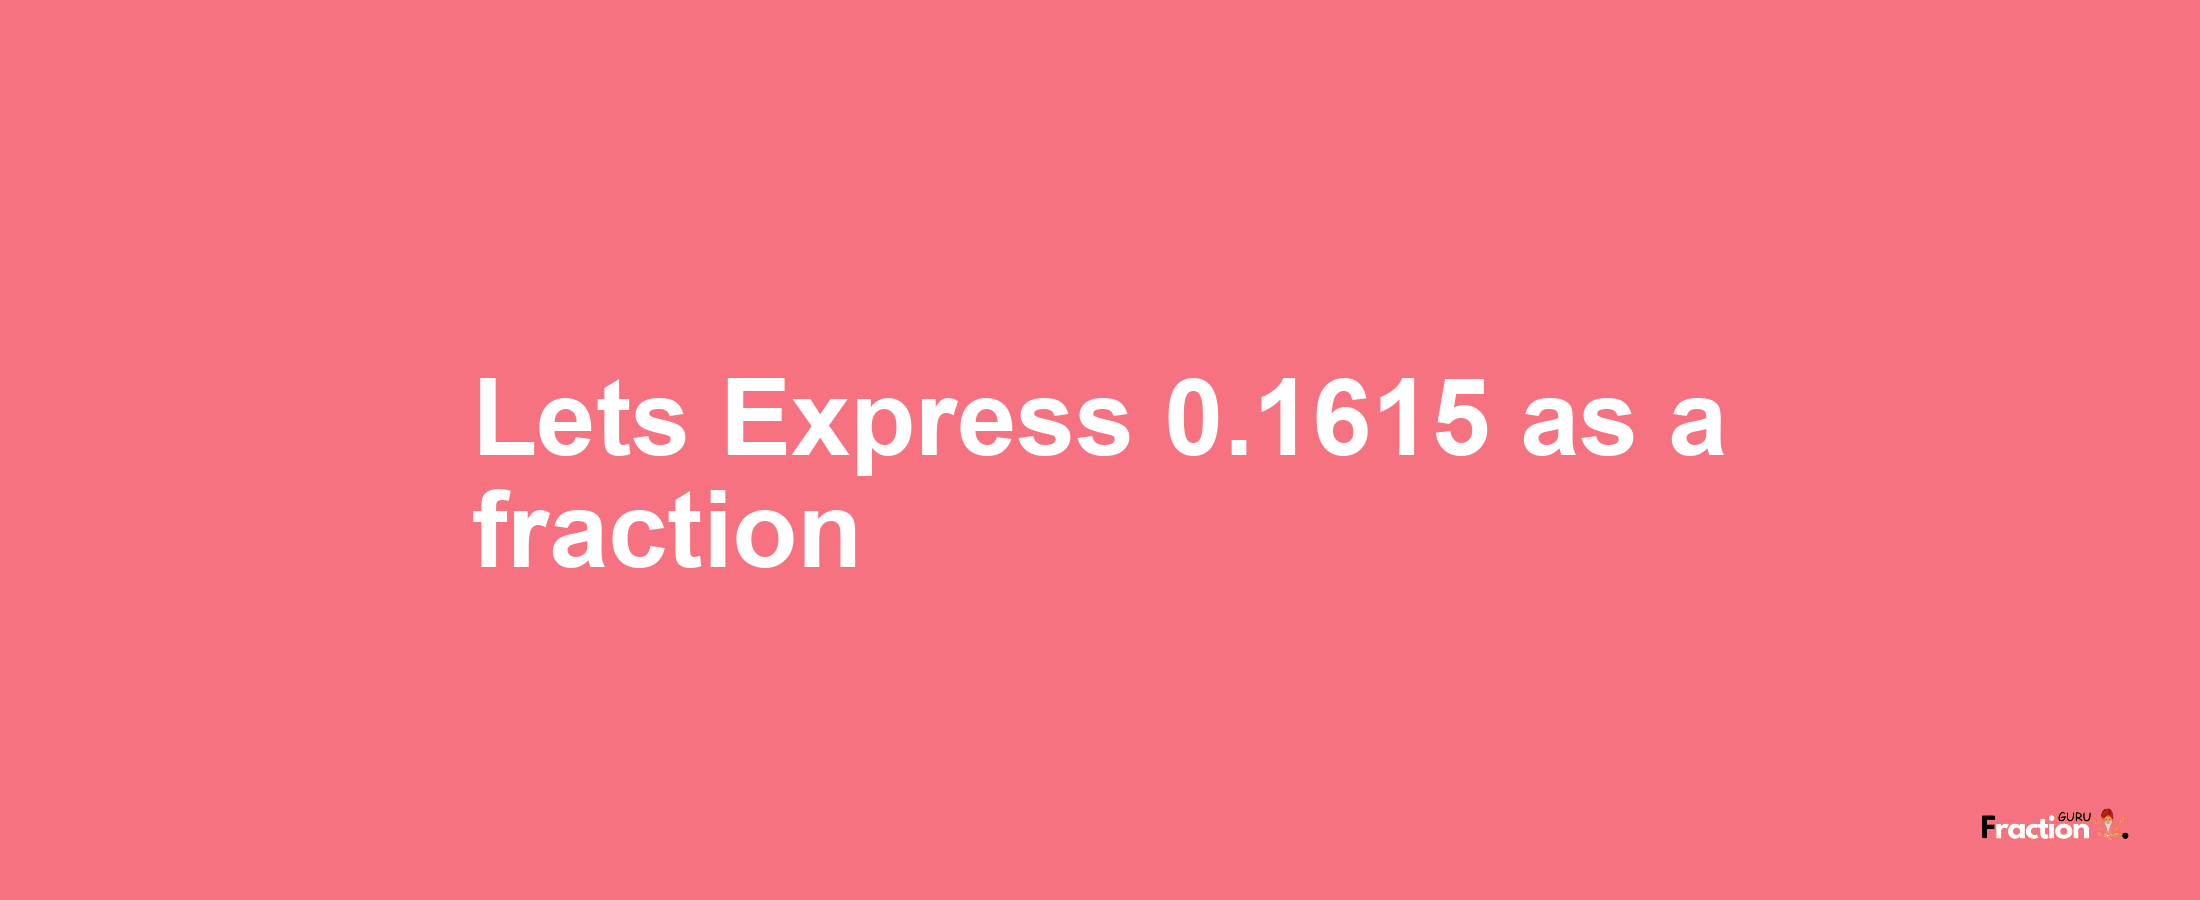 Lets Express 0.1615 as afraction